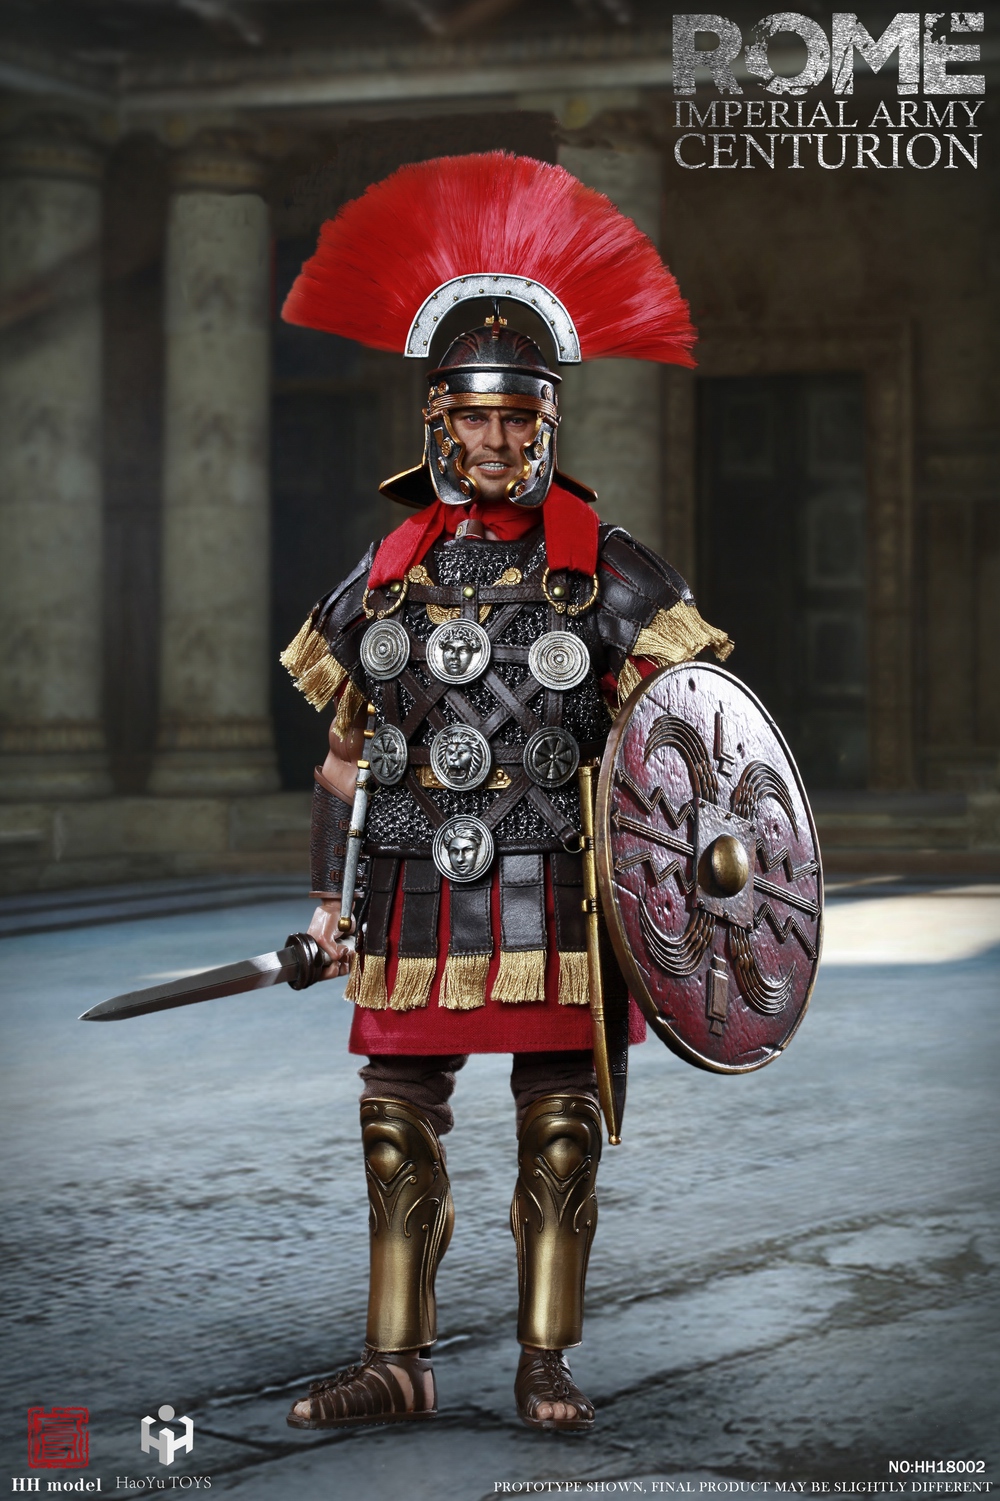 NEW PRODUCT: HH Model X HaoYuTOYS :1/6 Imperial Army — Centurion Action Figure 12331110